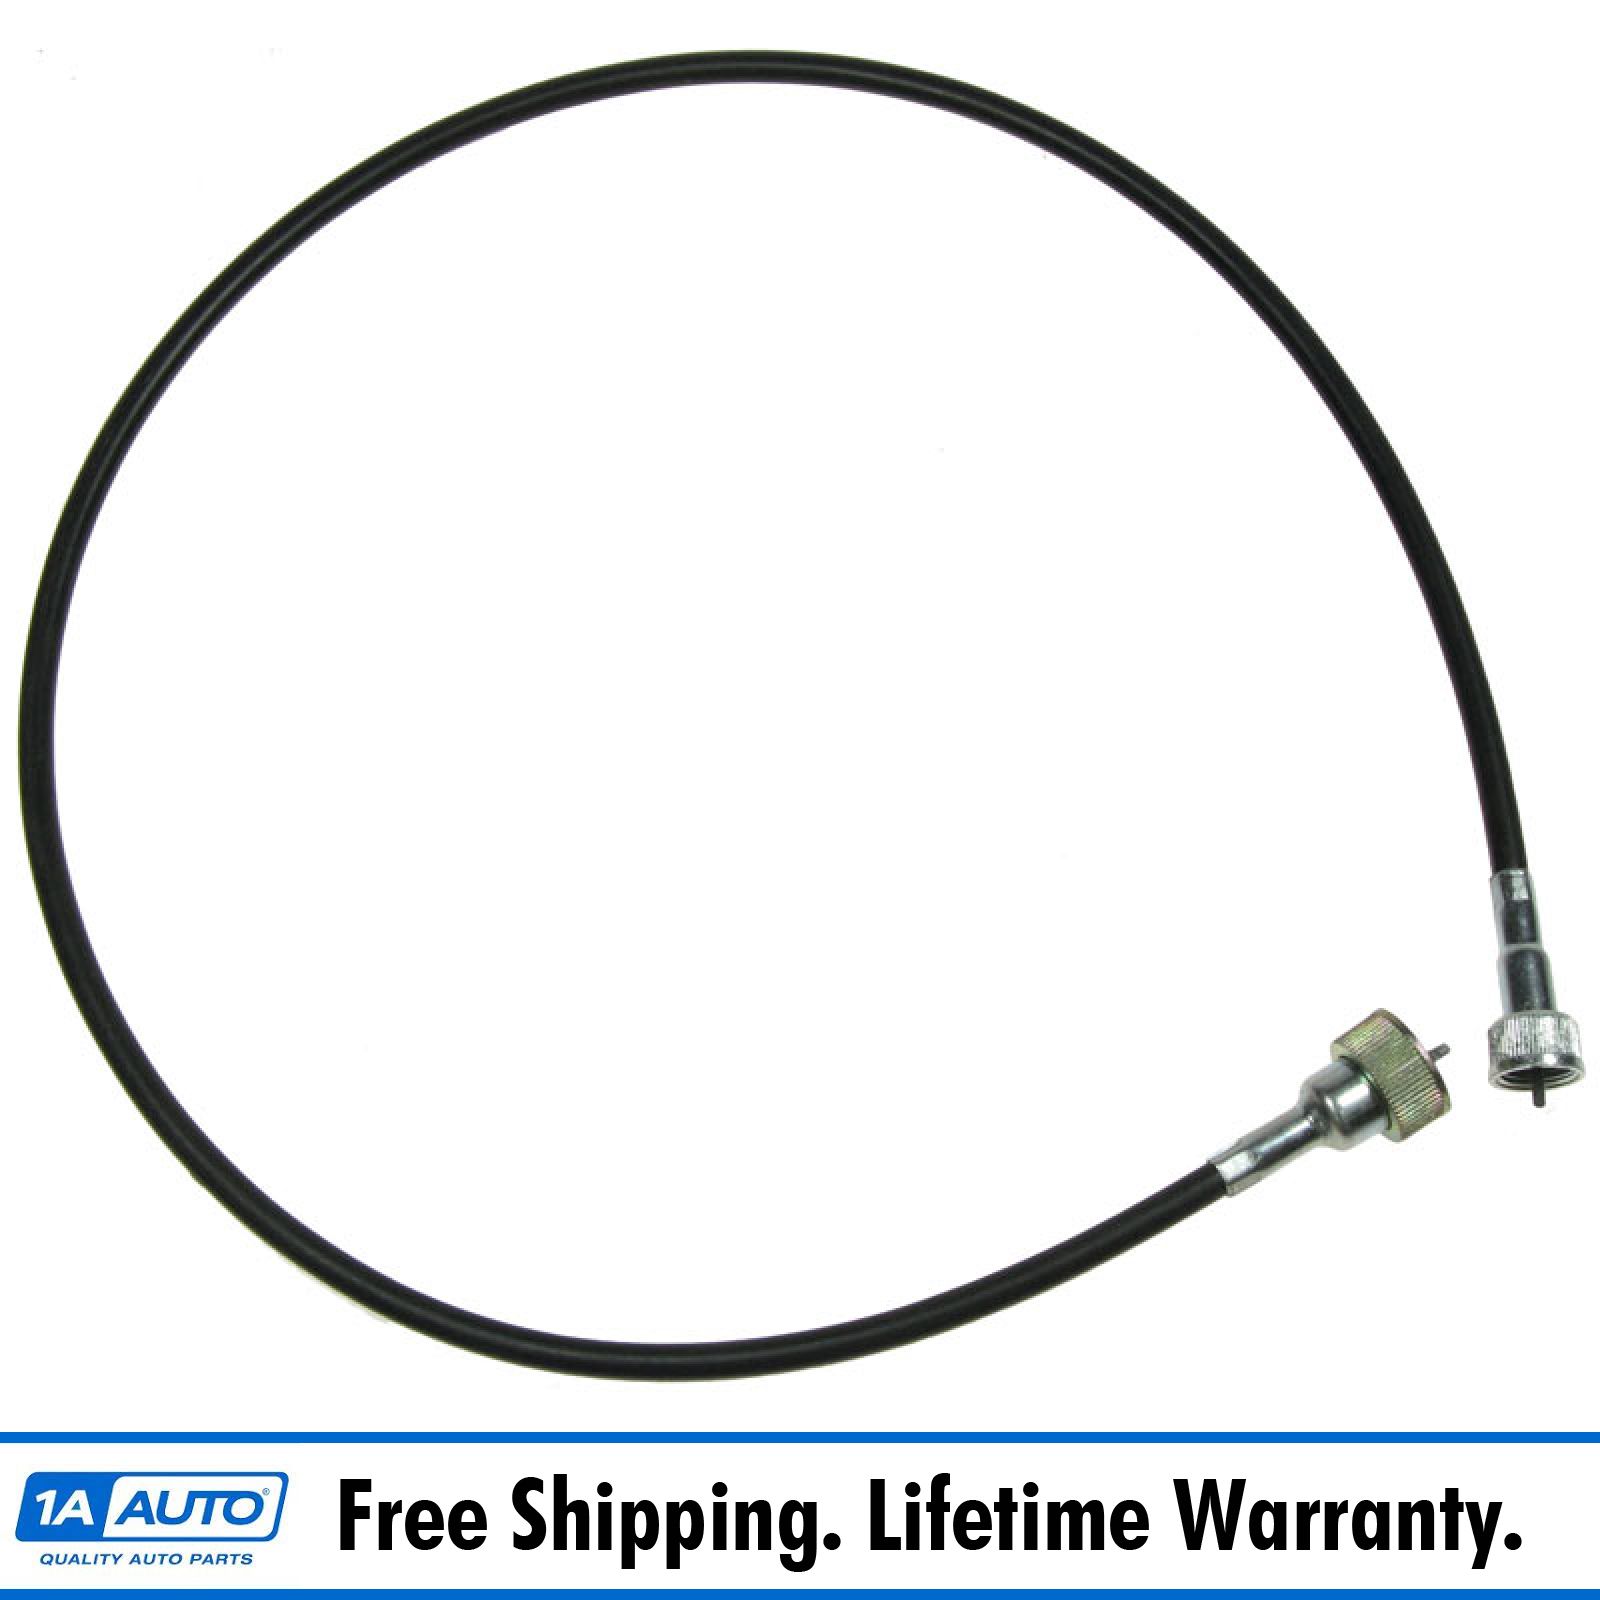 Chrysler speedometer cable #1